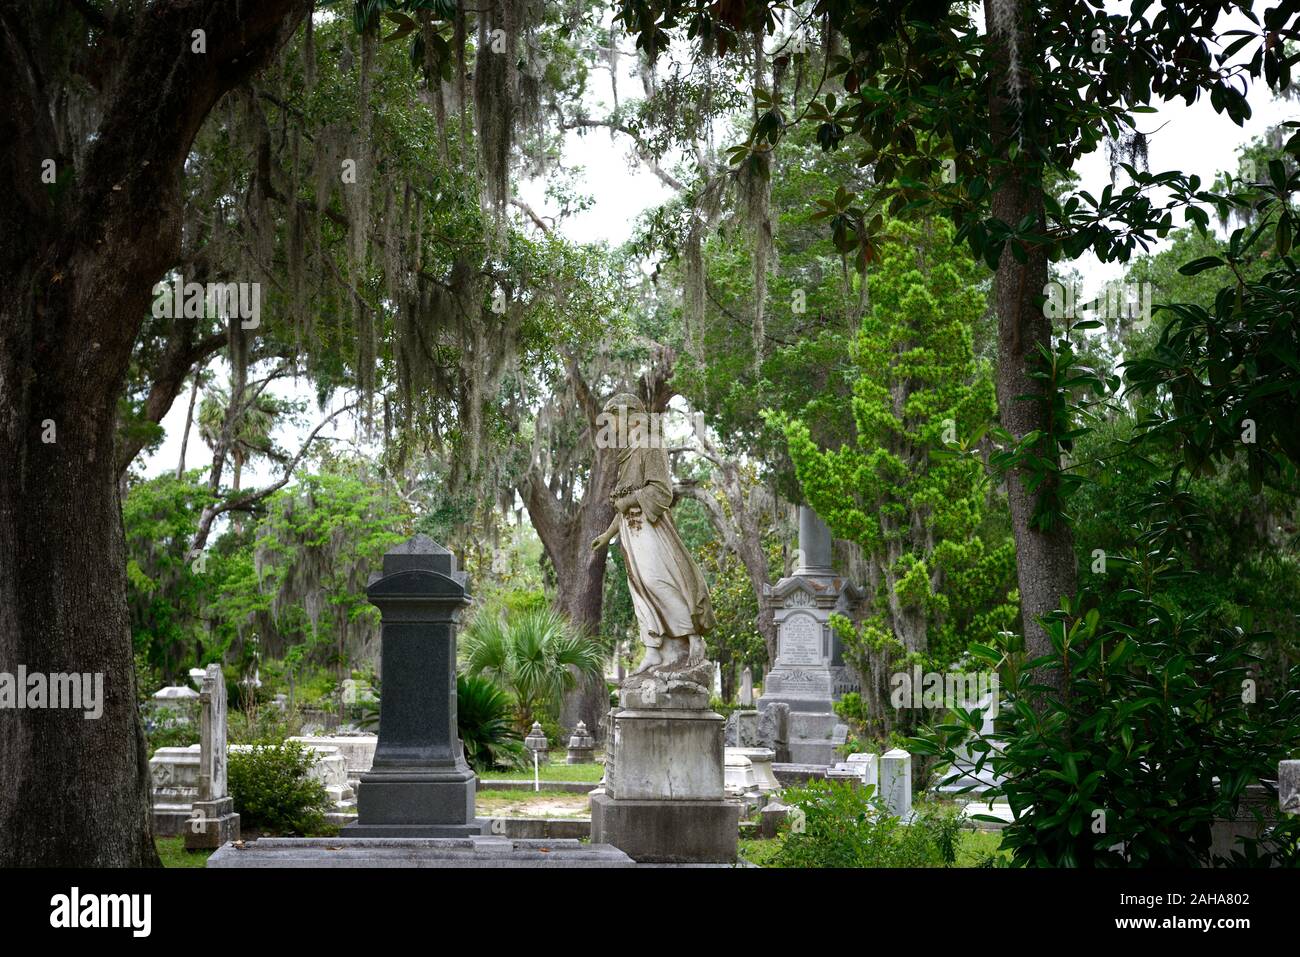 Angel statue,looking down on,Graveyard,graves,grave,tombstone,tombstones,cemeteries,historical site,Live Oaks,Quercus virginiana,Spanish Moss,Tilandsi Stock Photo